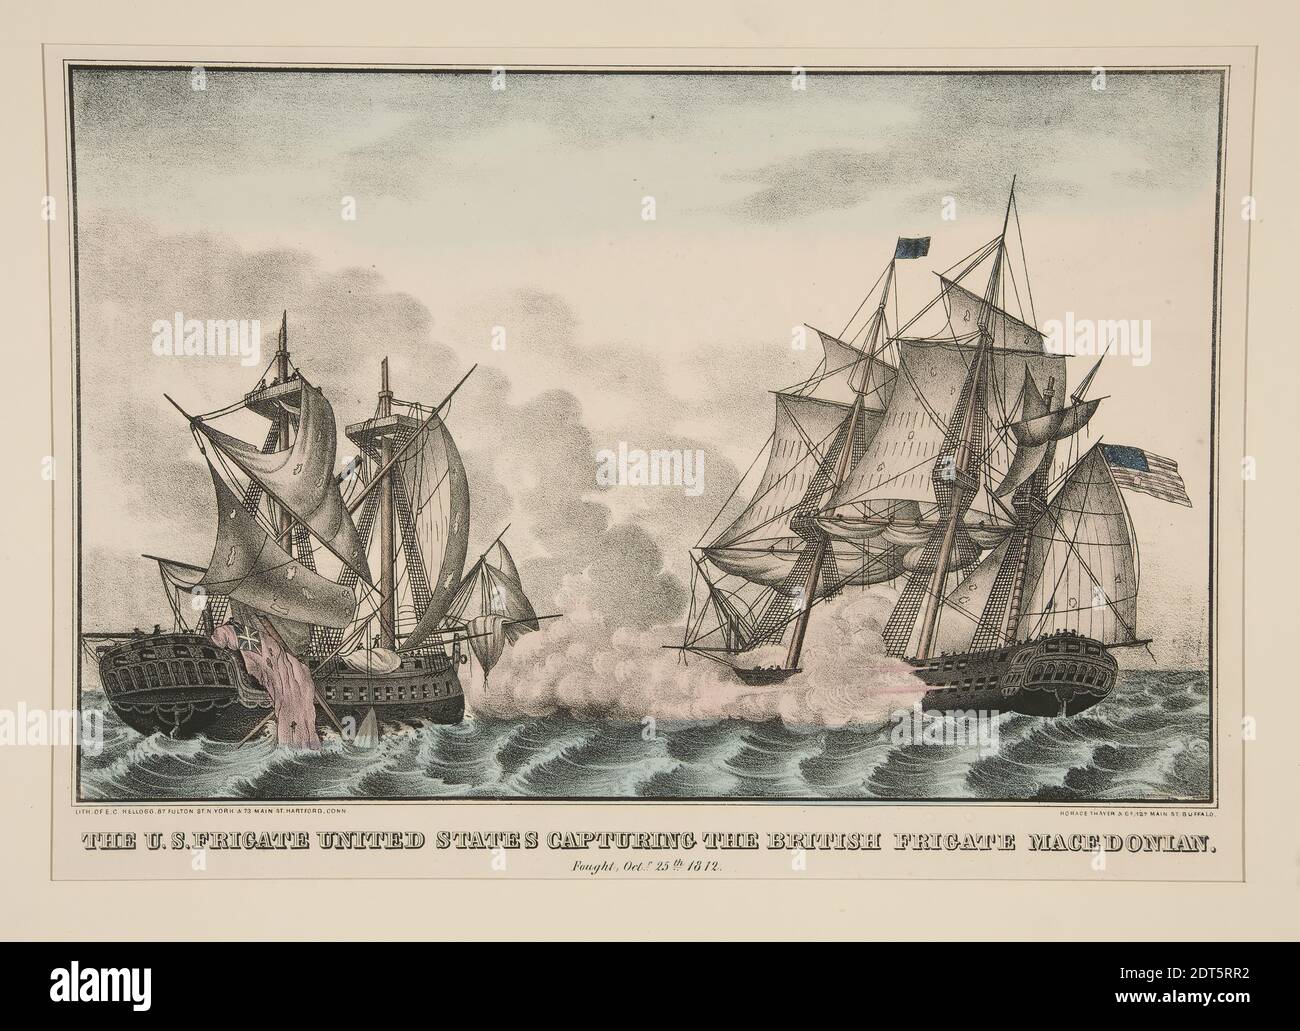 Artist: Horace Thayer, American, born 1811, After: Elijah C. Kellogg, American, 1811–1881, The U.S. Frigate United States capturing the British Frigate Macedonian (no. 426), Lithograph colored by hand, sheet: 31.6 × 41.6 cm (12 7/16 × 16 3/8 in.), Made in United States, American, 19th century, Works on Paper - Prints Stock Photo